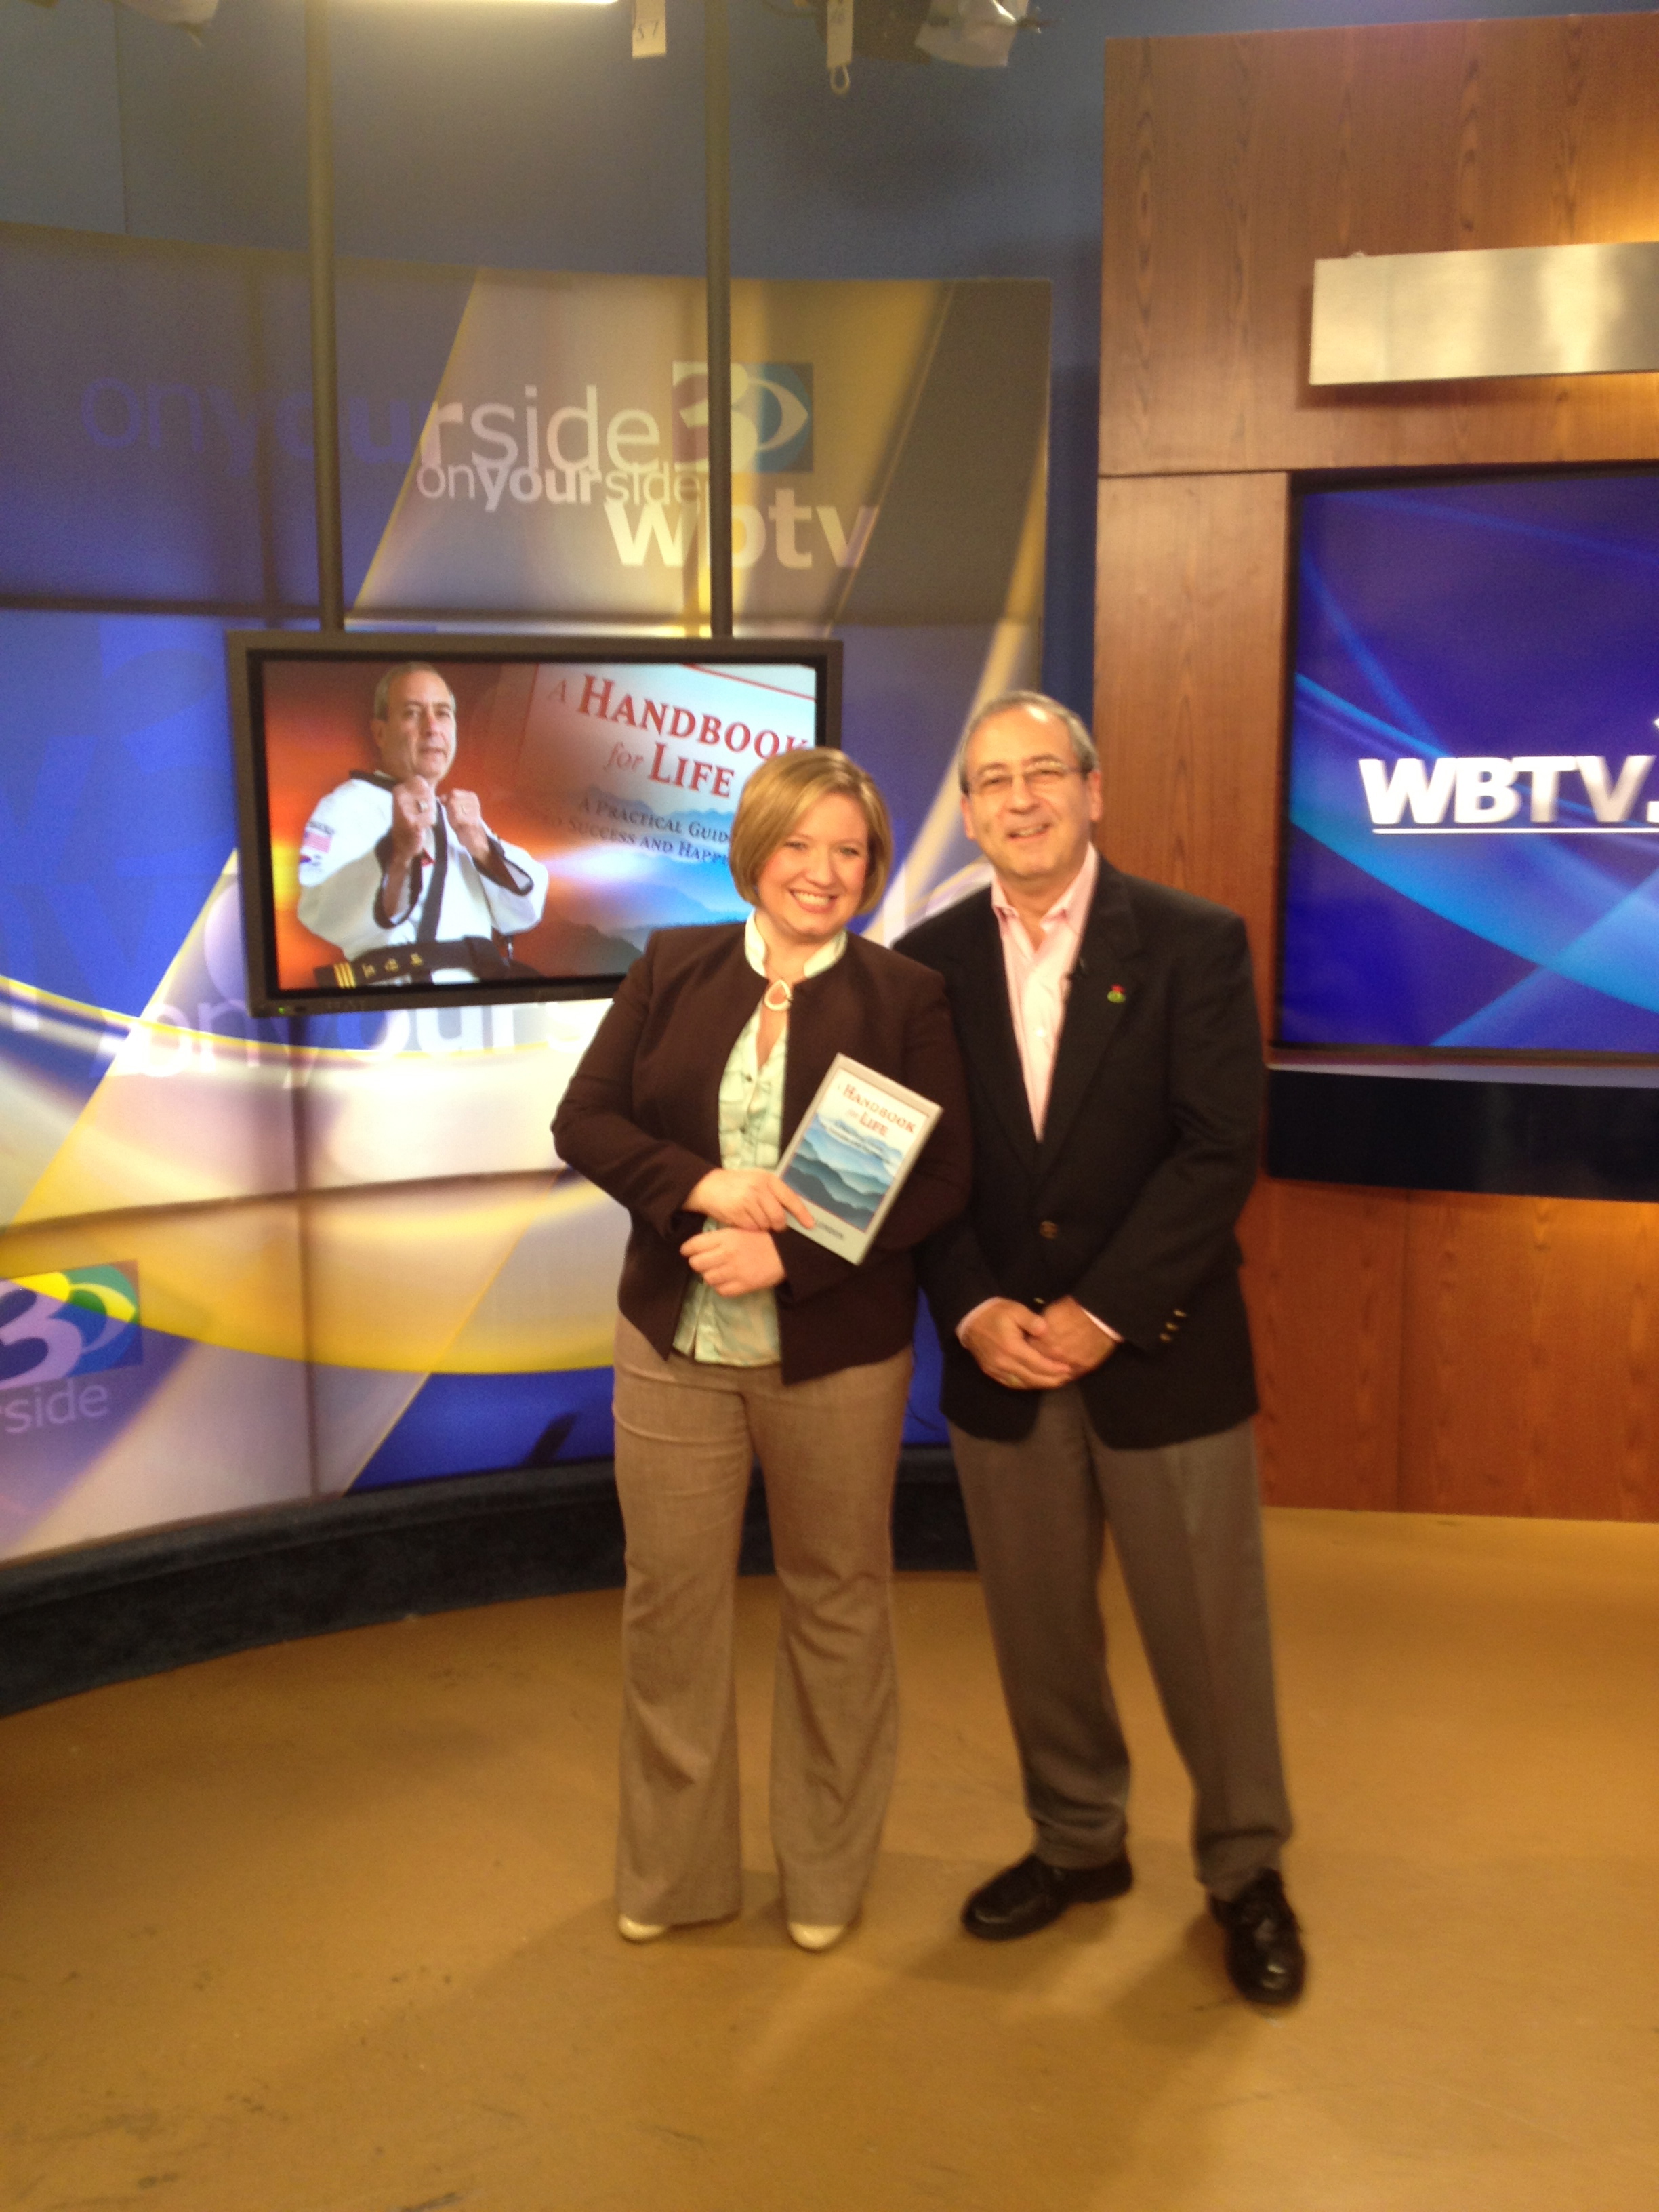 Richard London, aro client, on set at WBTV for an interview on his first book "A Handbook for Life"